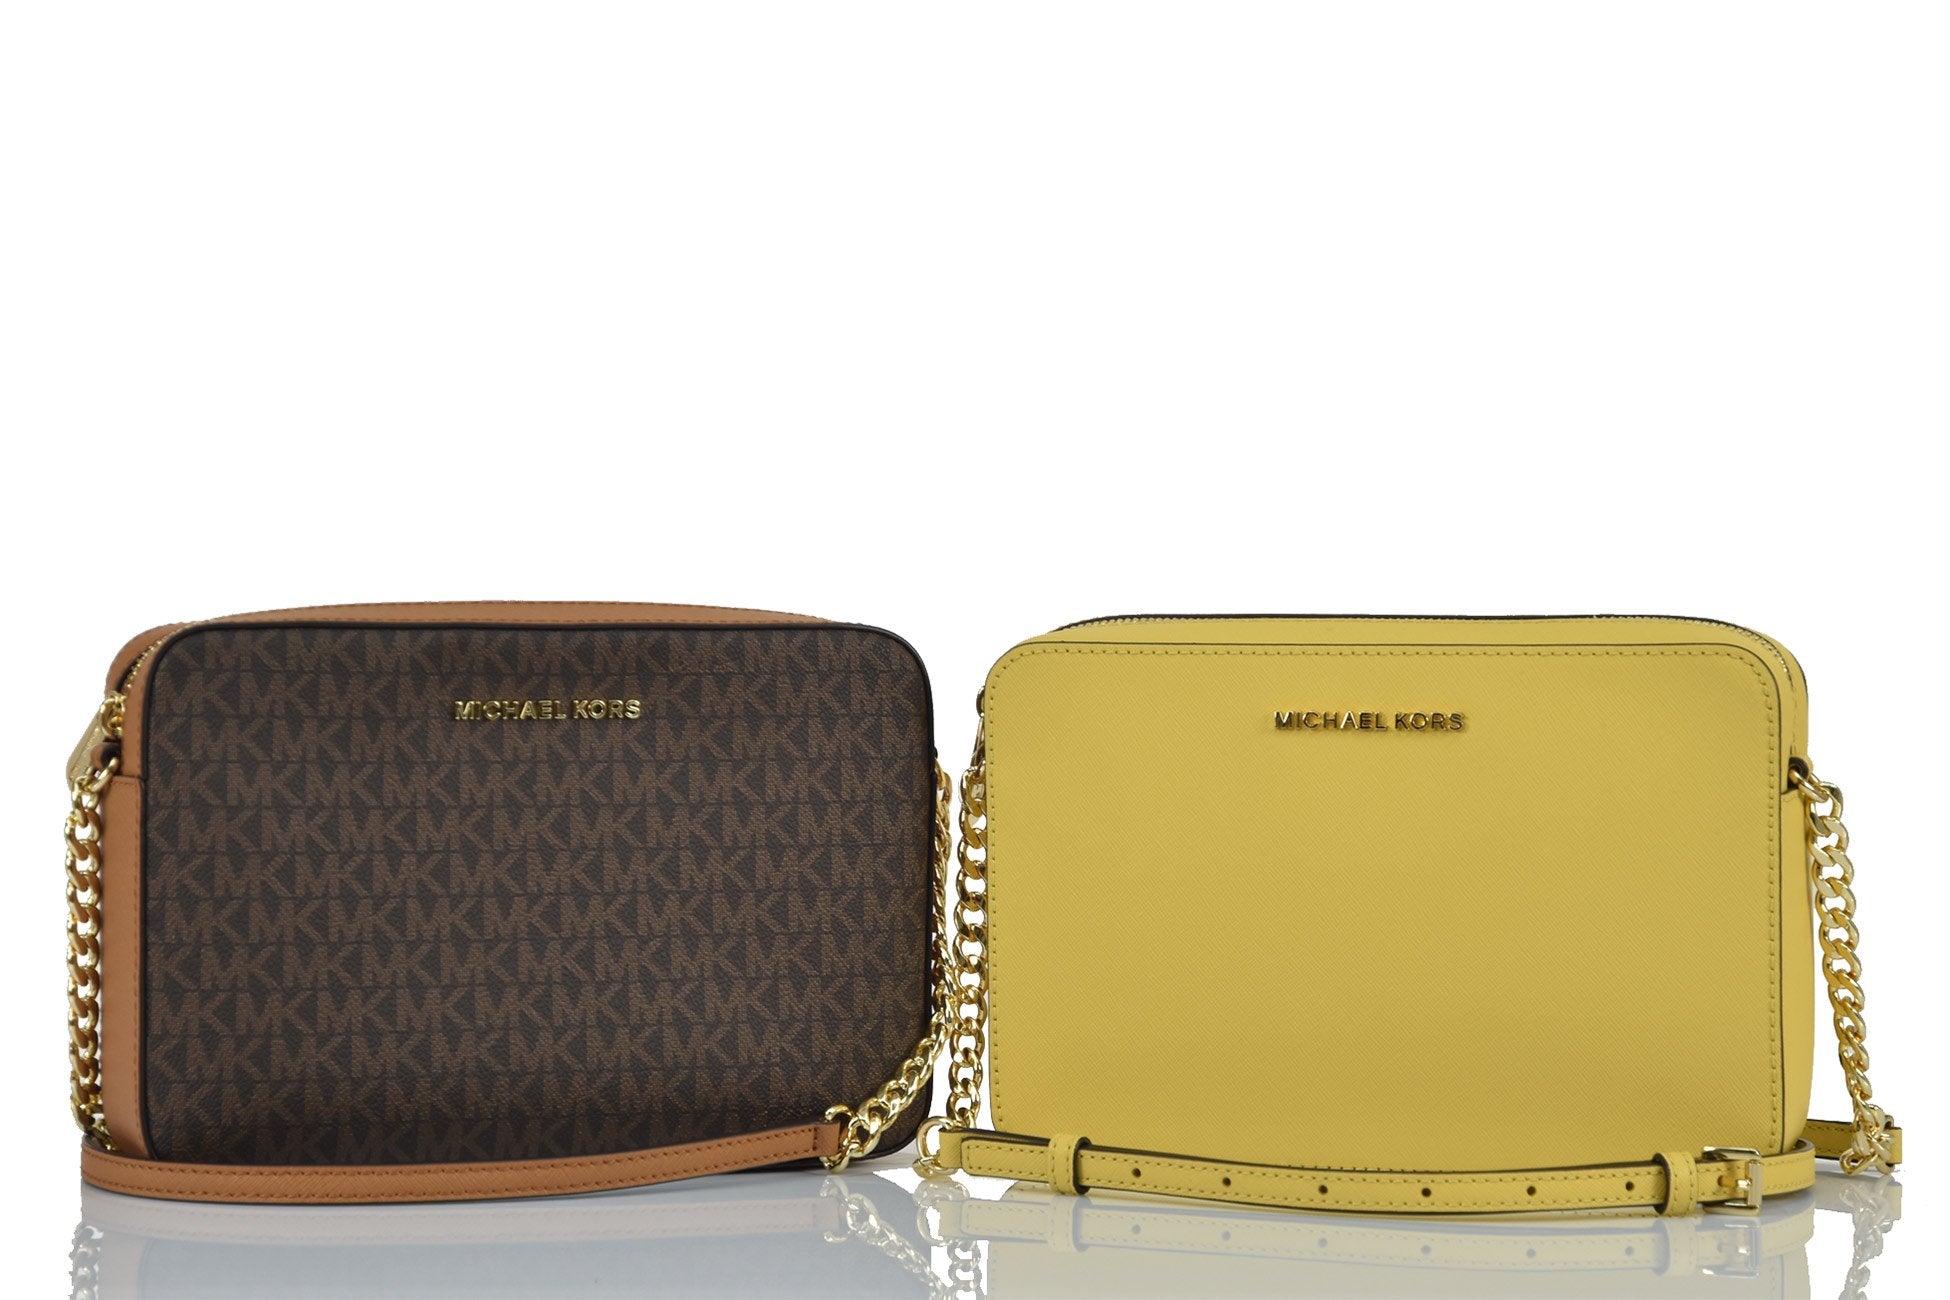 Michael Kors women's bags: when a single product launches a brand